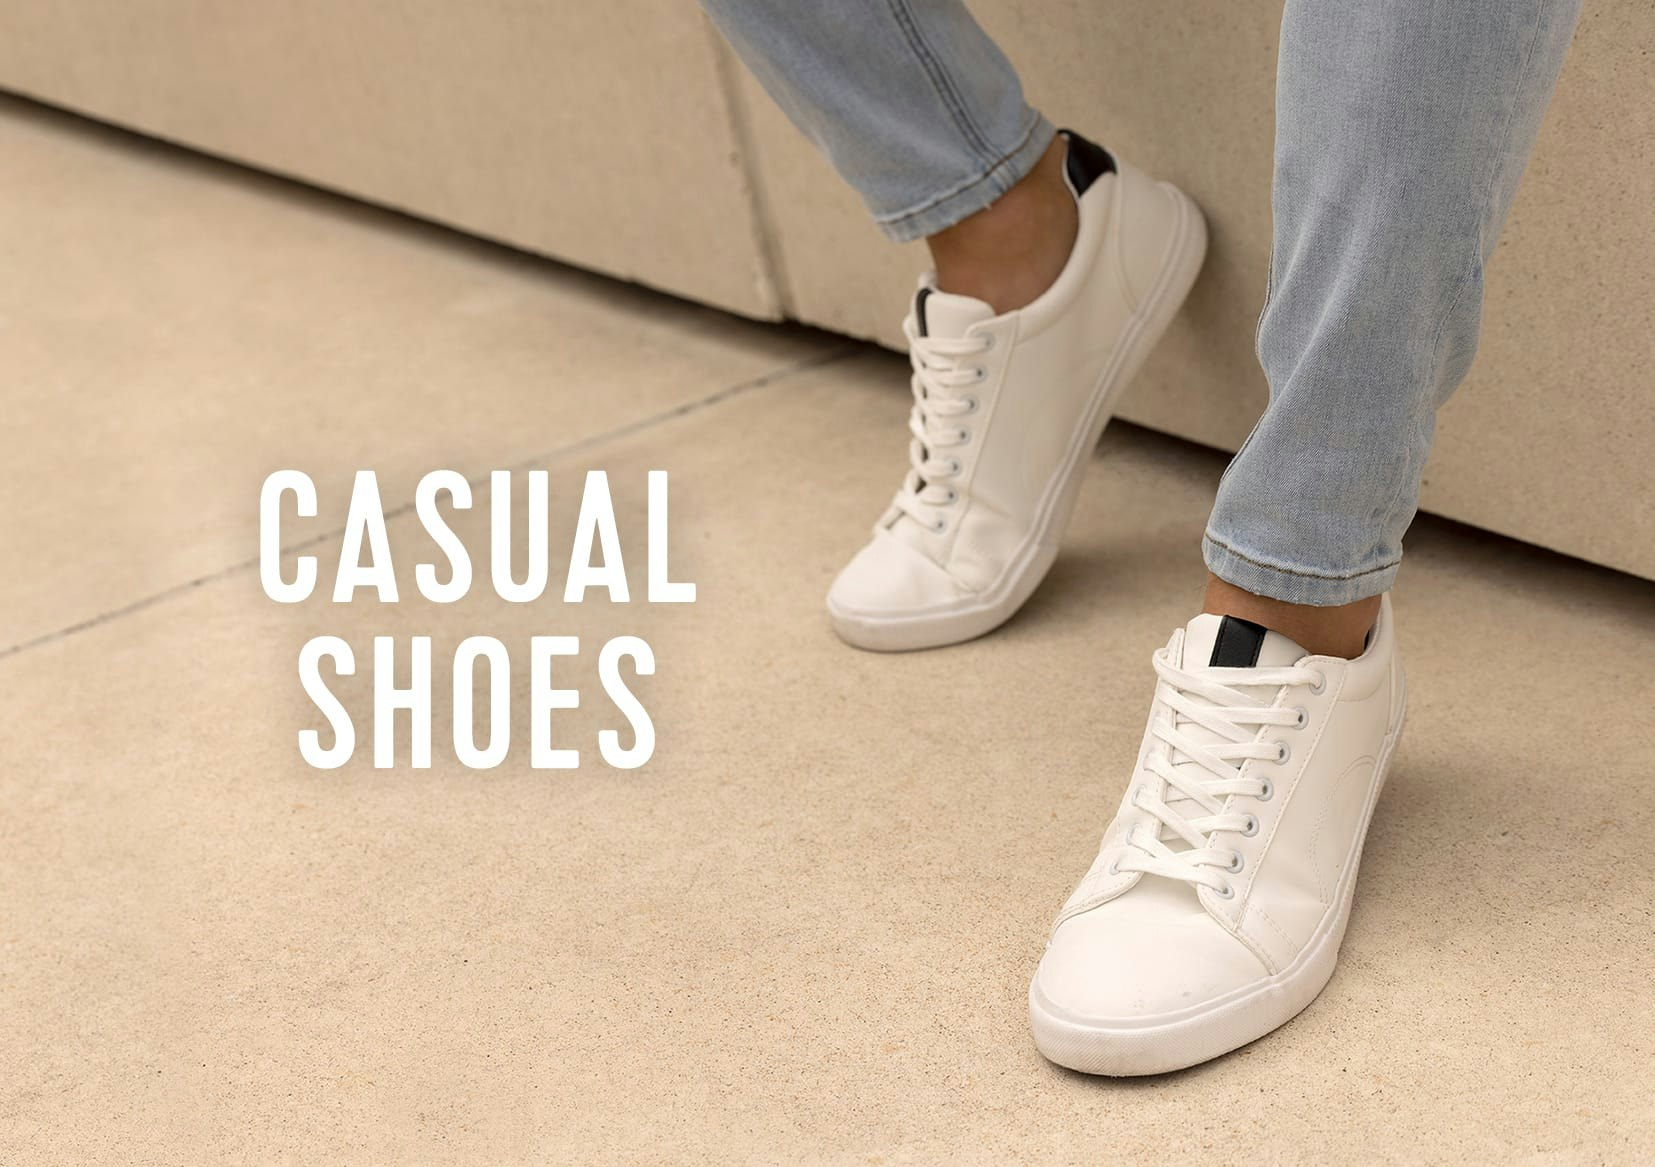 Casual Shoes